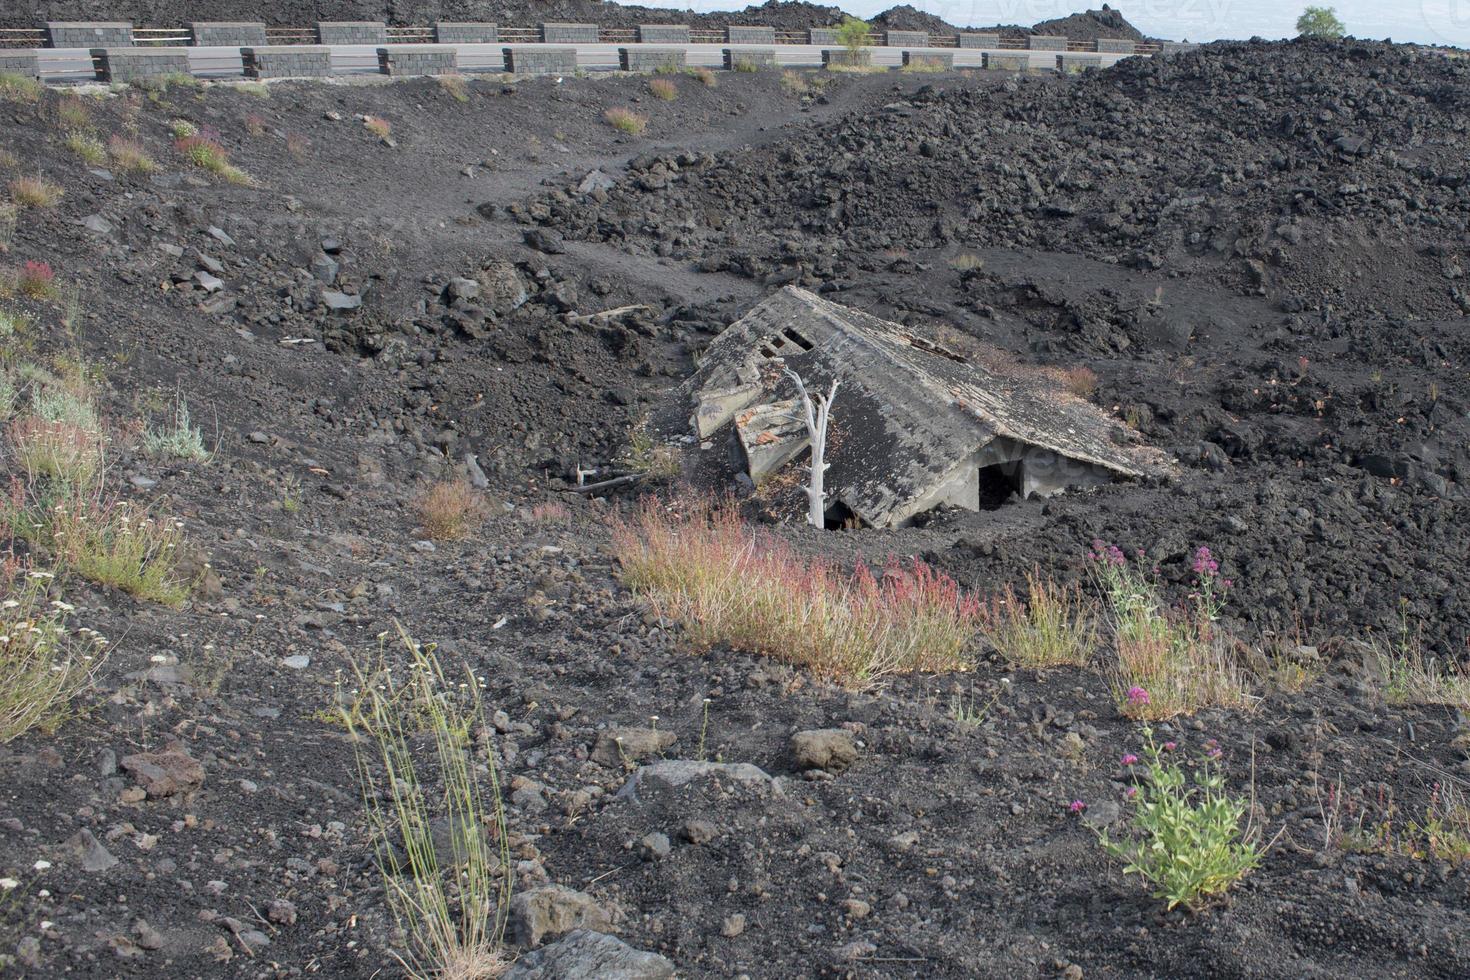 House destroyed by eruption on etna volcano photo